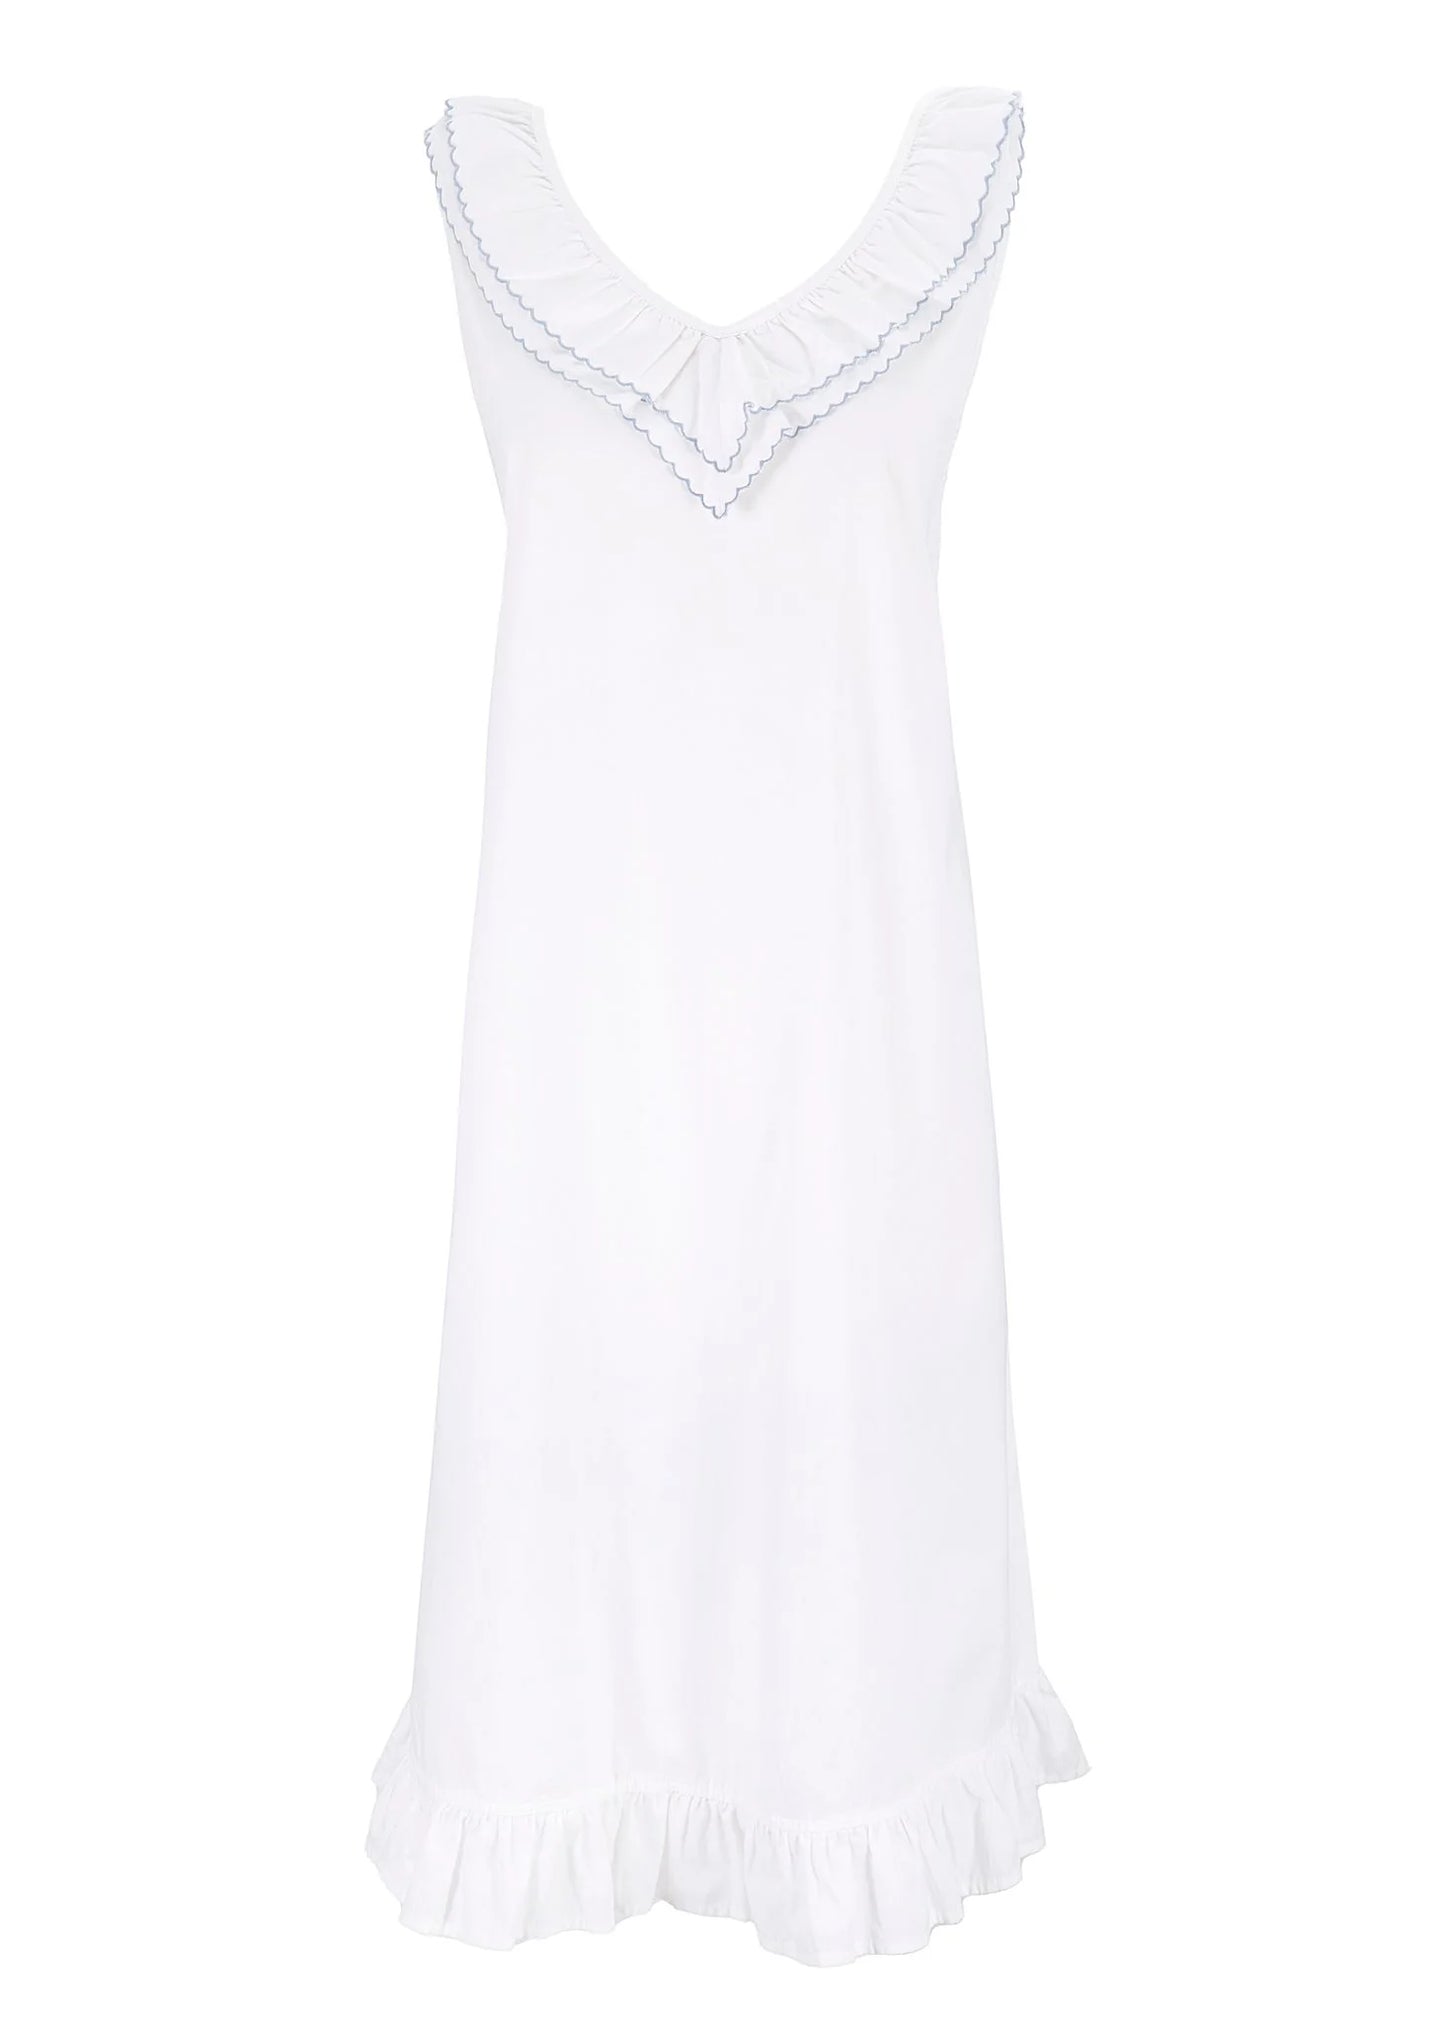 Nightgown- Lulie Cotton Ruffle